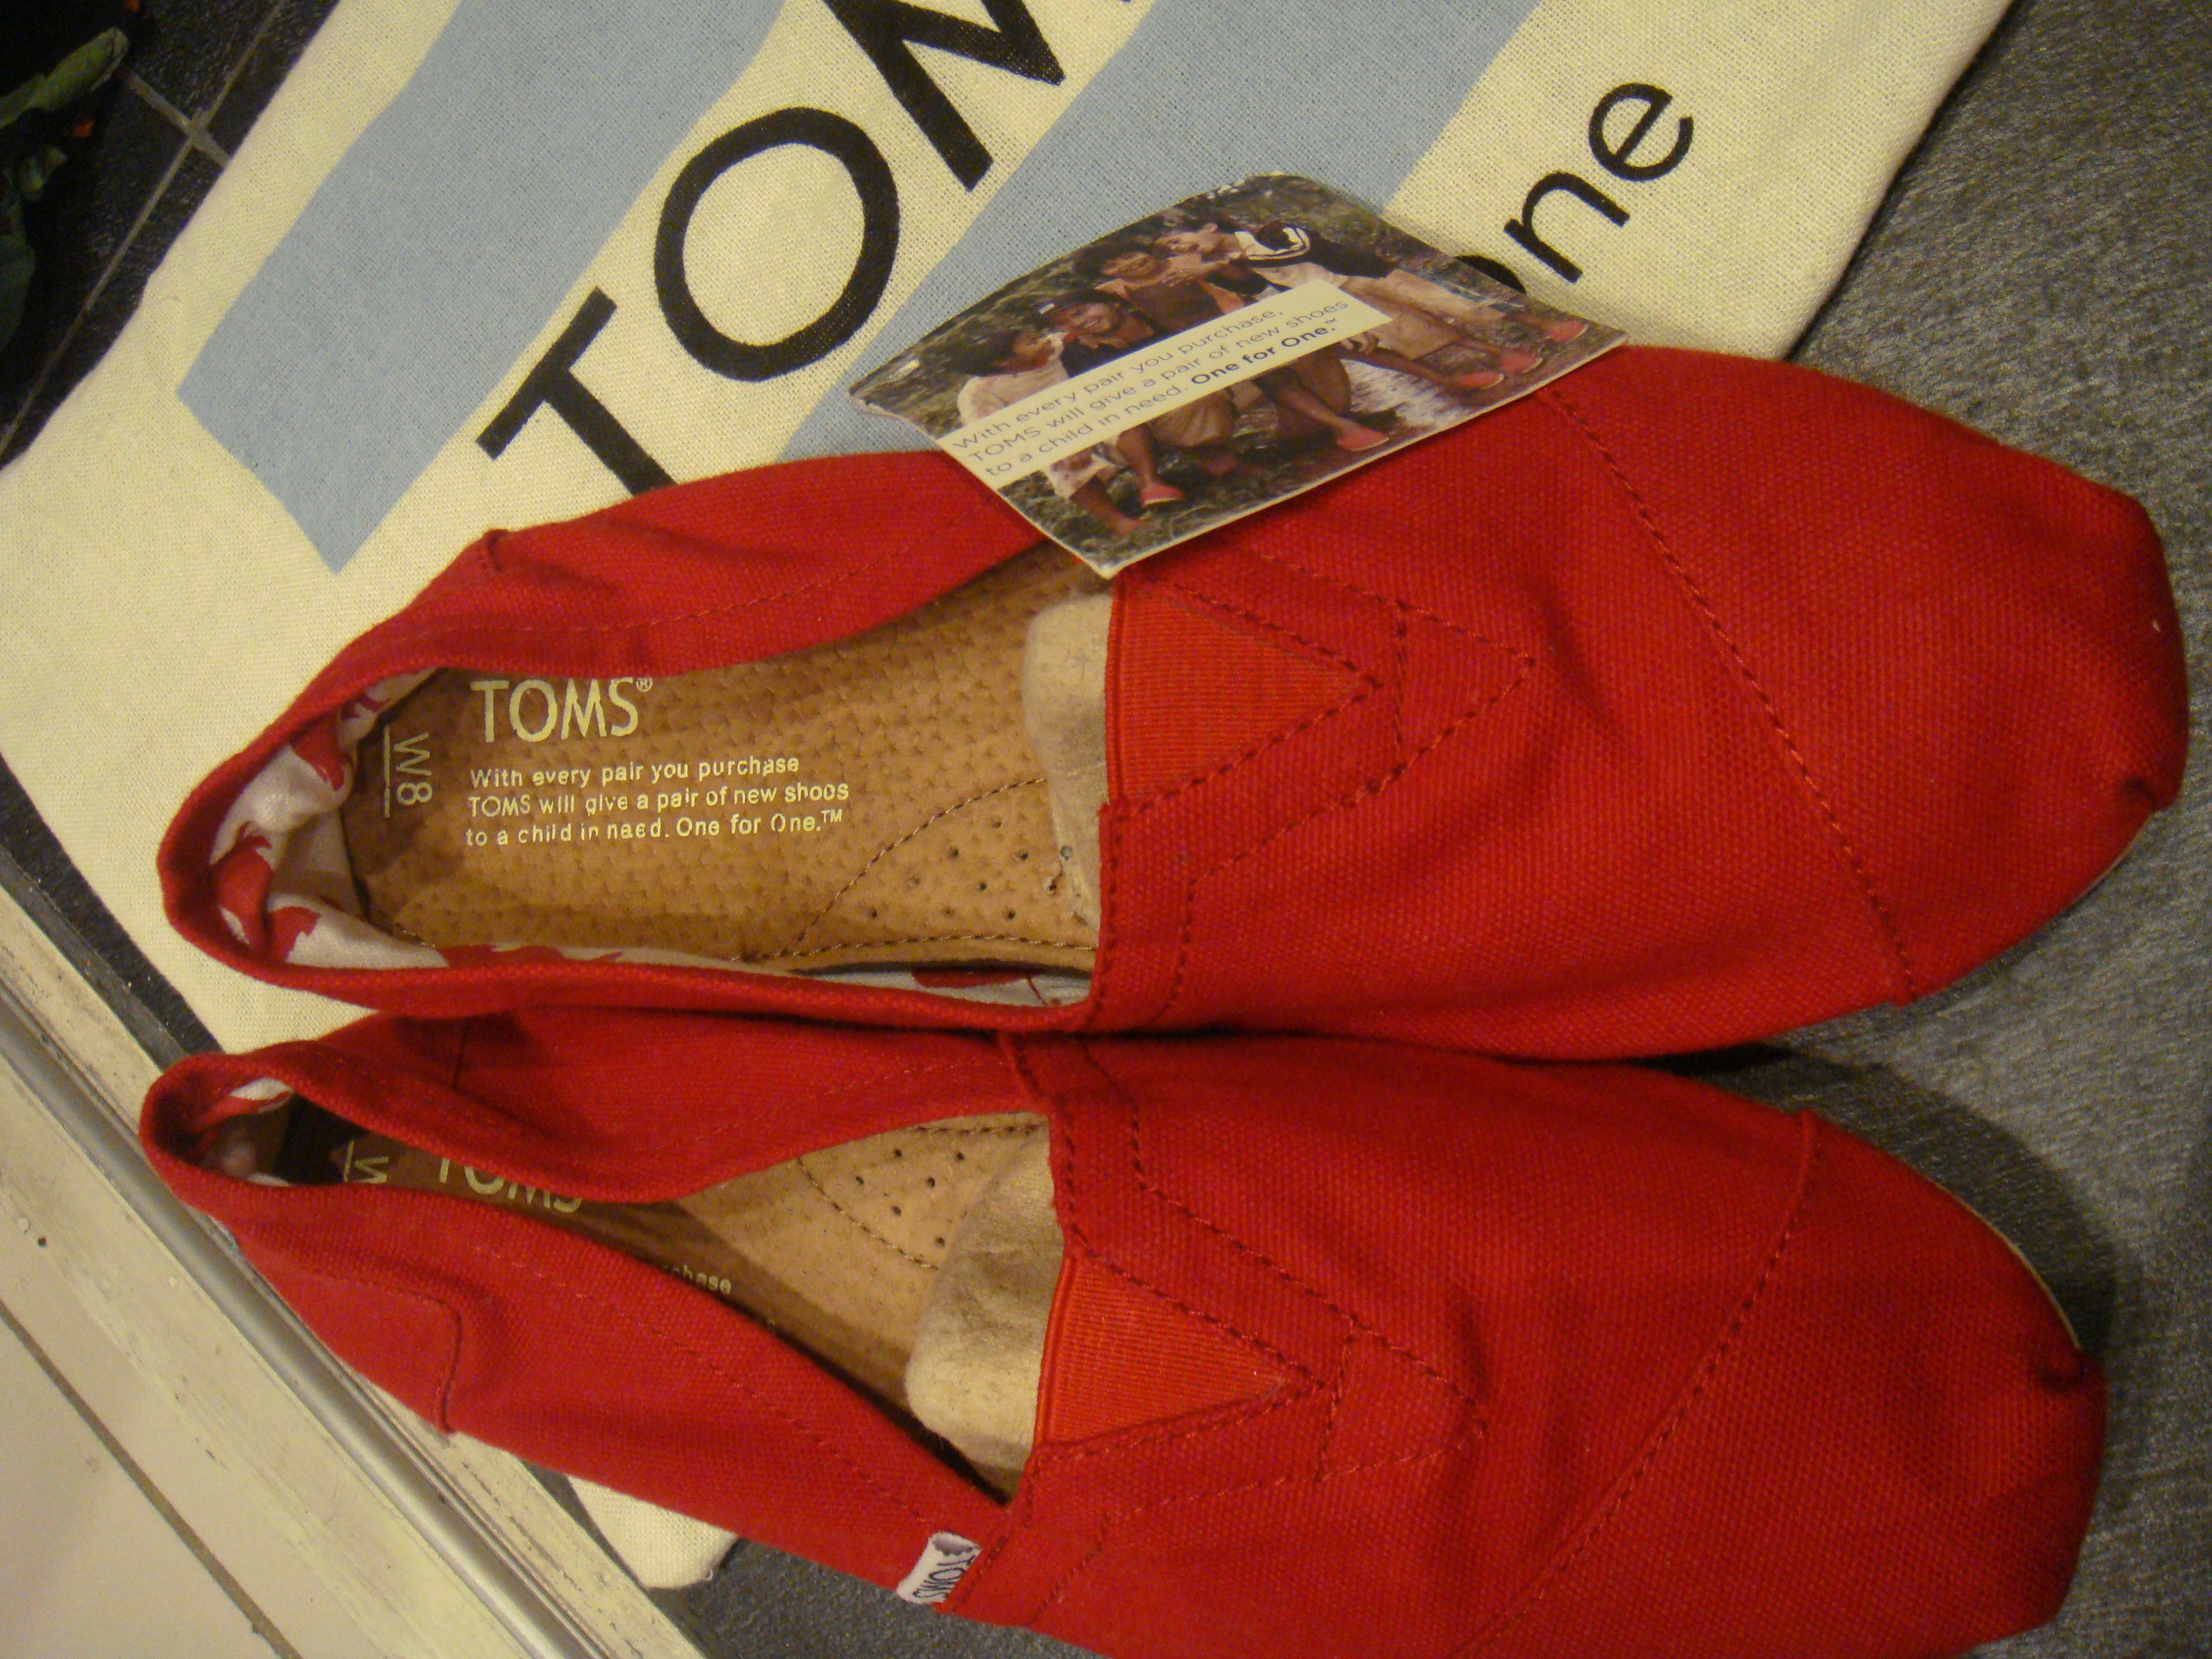 Tried & Tested: TOMS Shoes